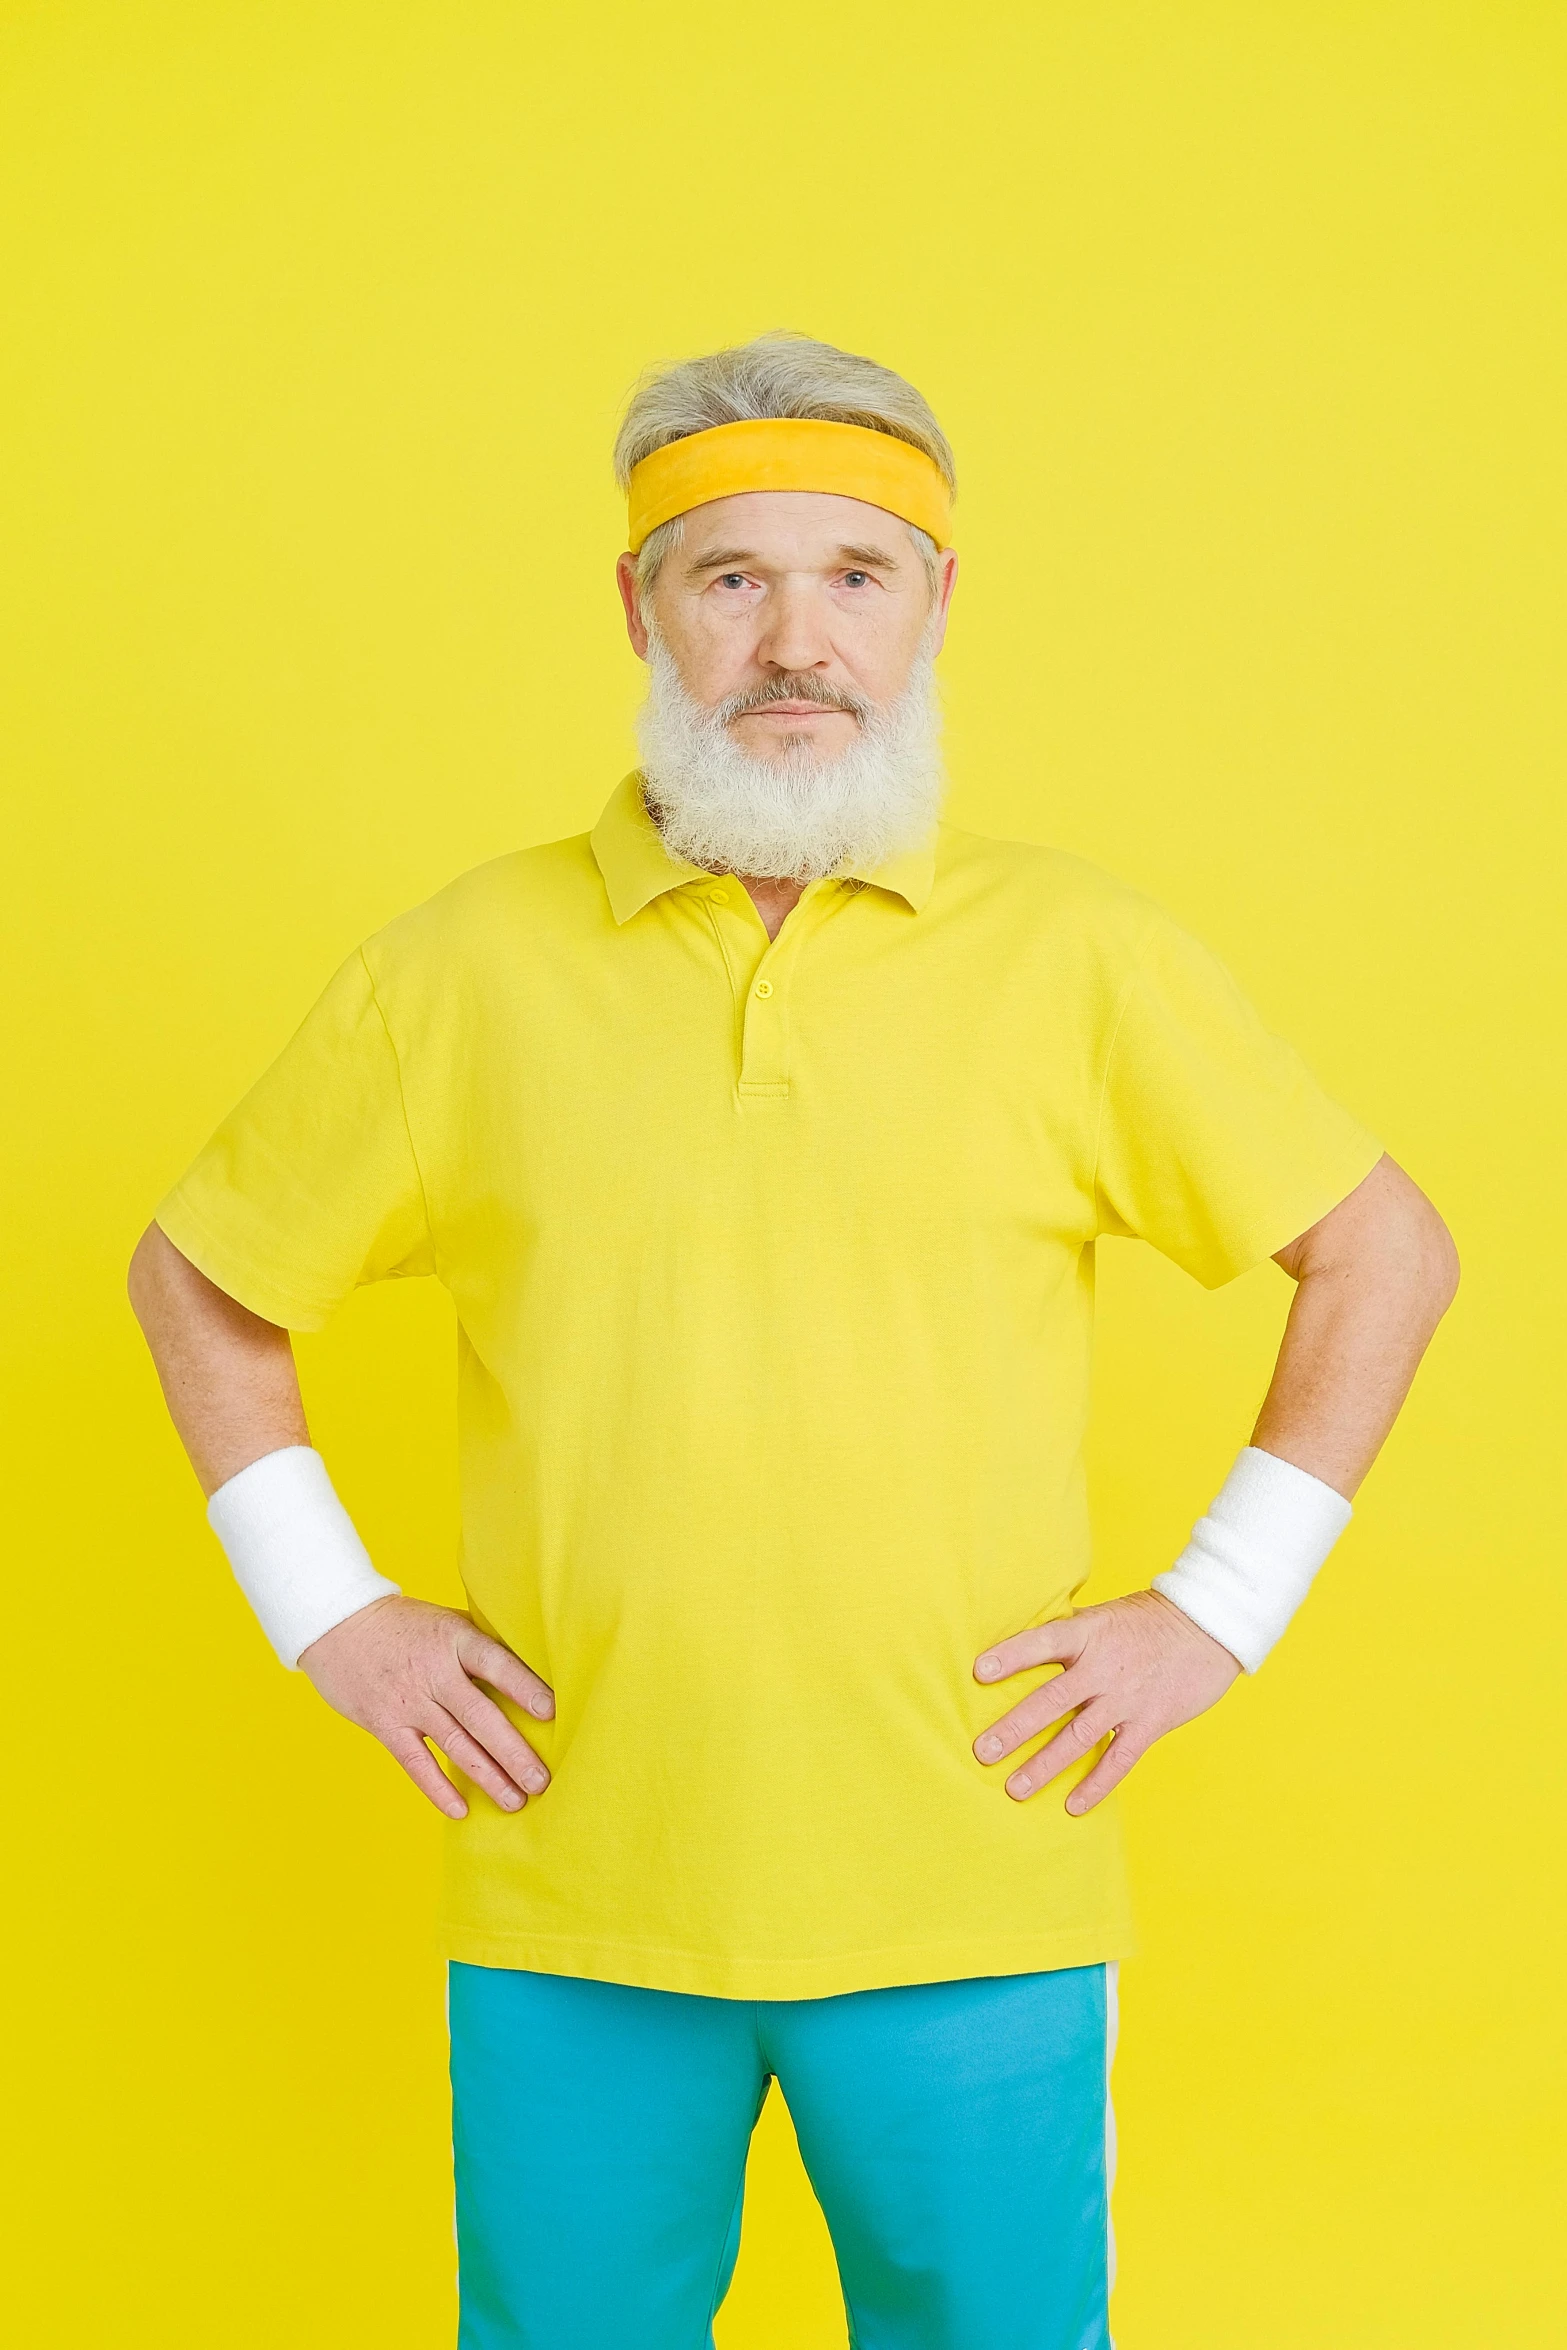 a man with a headband and eye patch standing in front of a yellow background